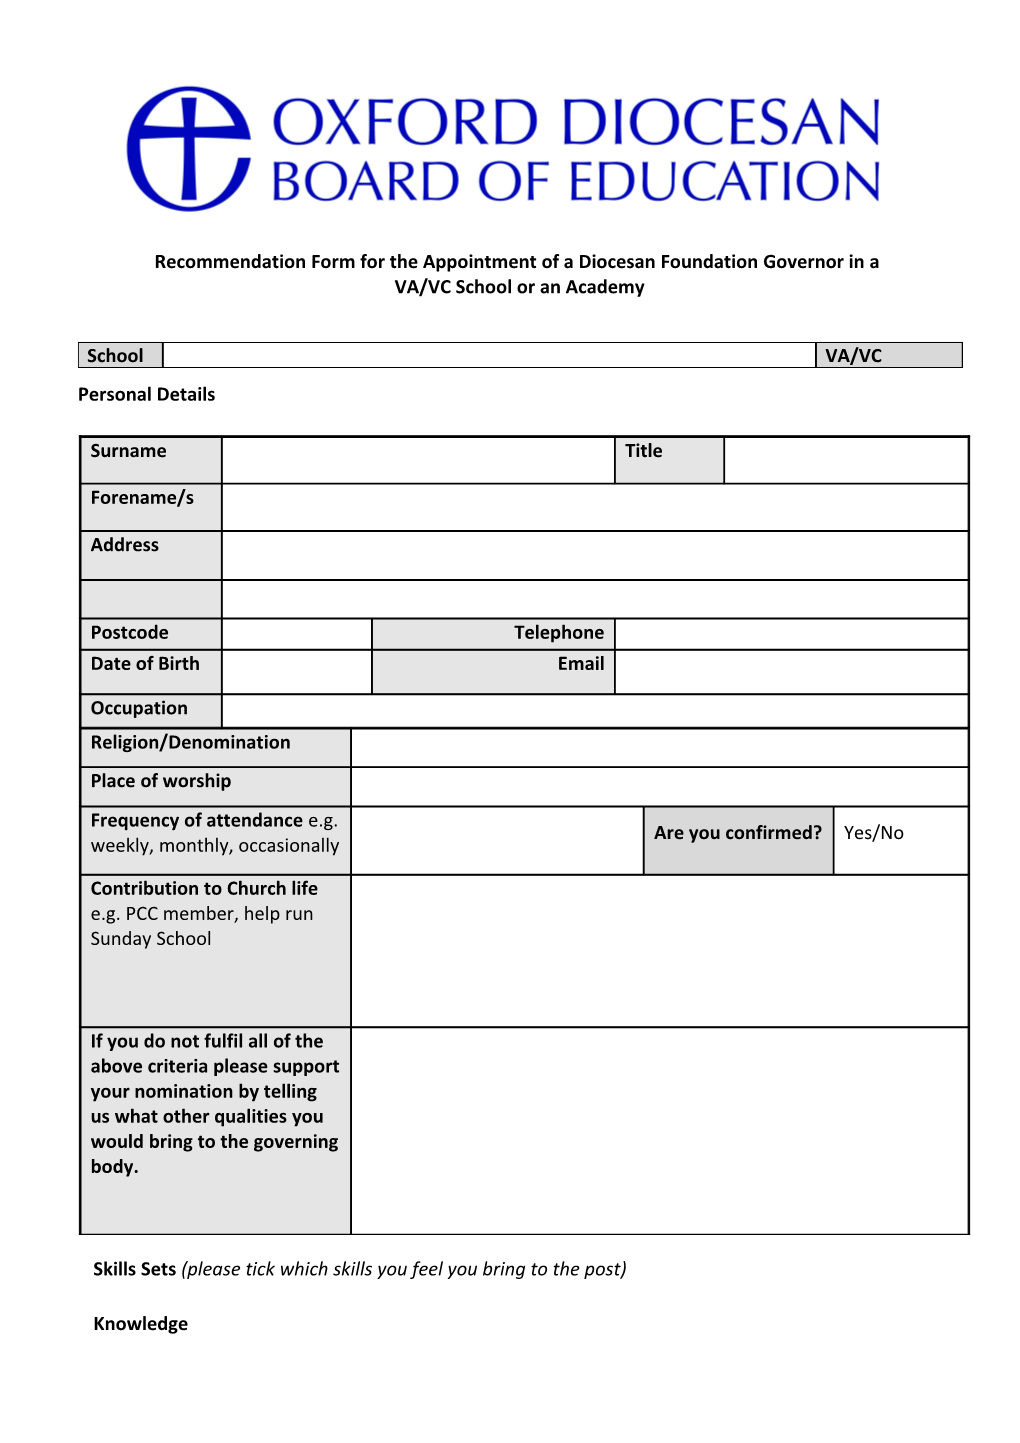 Recommendation Form for the Appointment of a Diocesan Foundation Governor in A